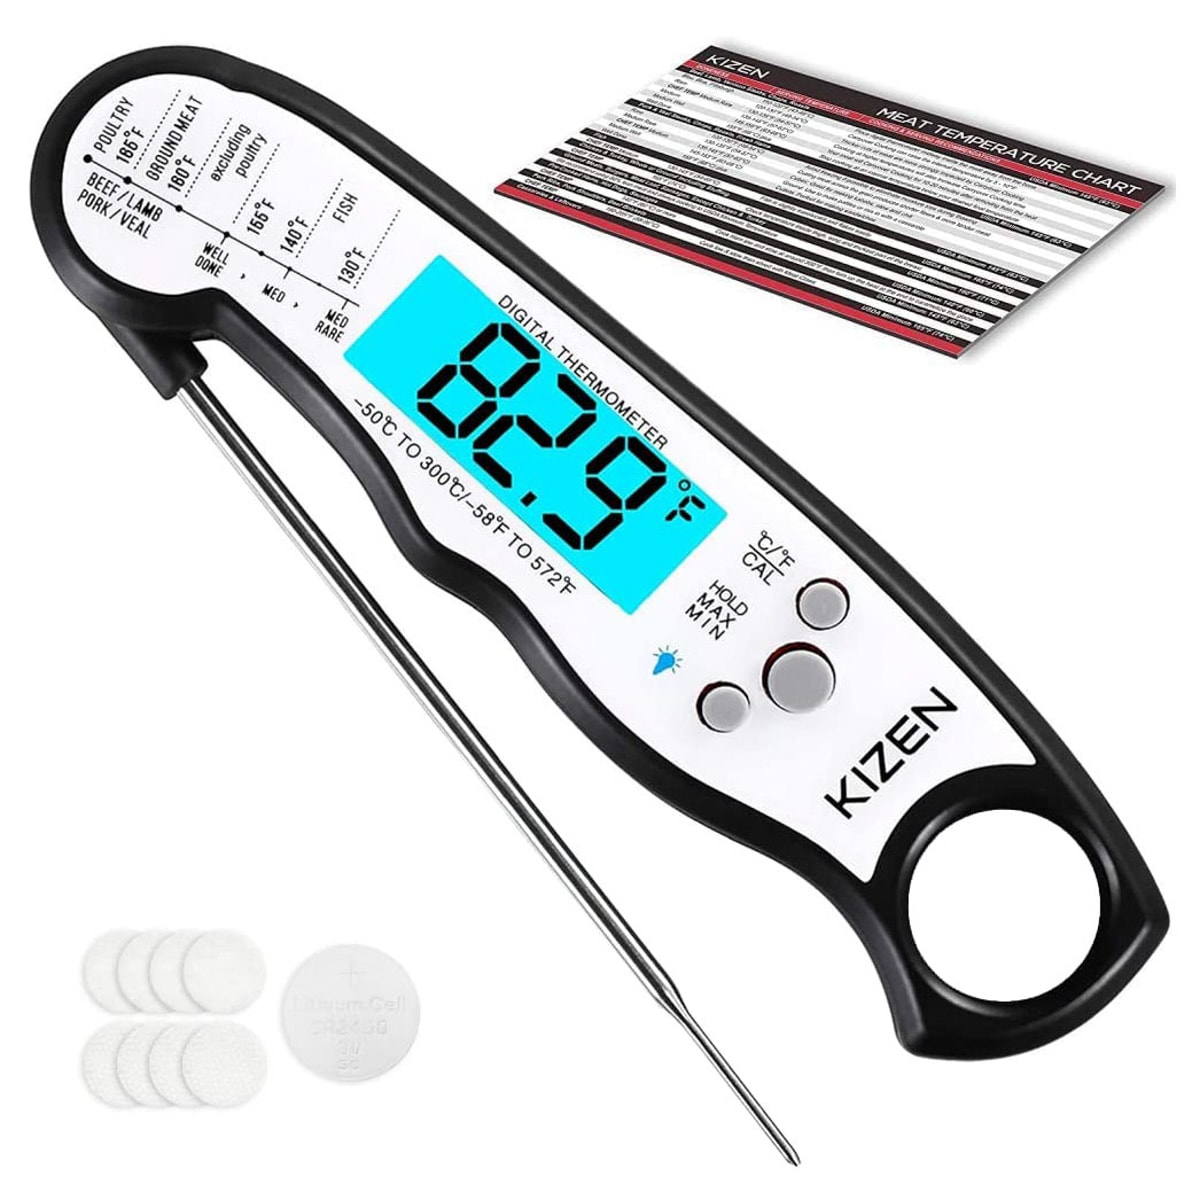 A digital meat thermometer with accessories.